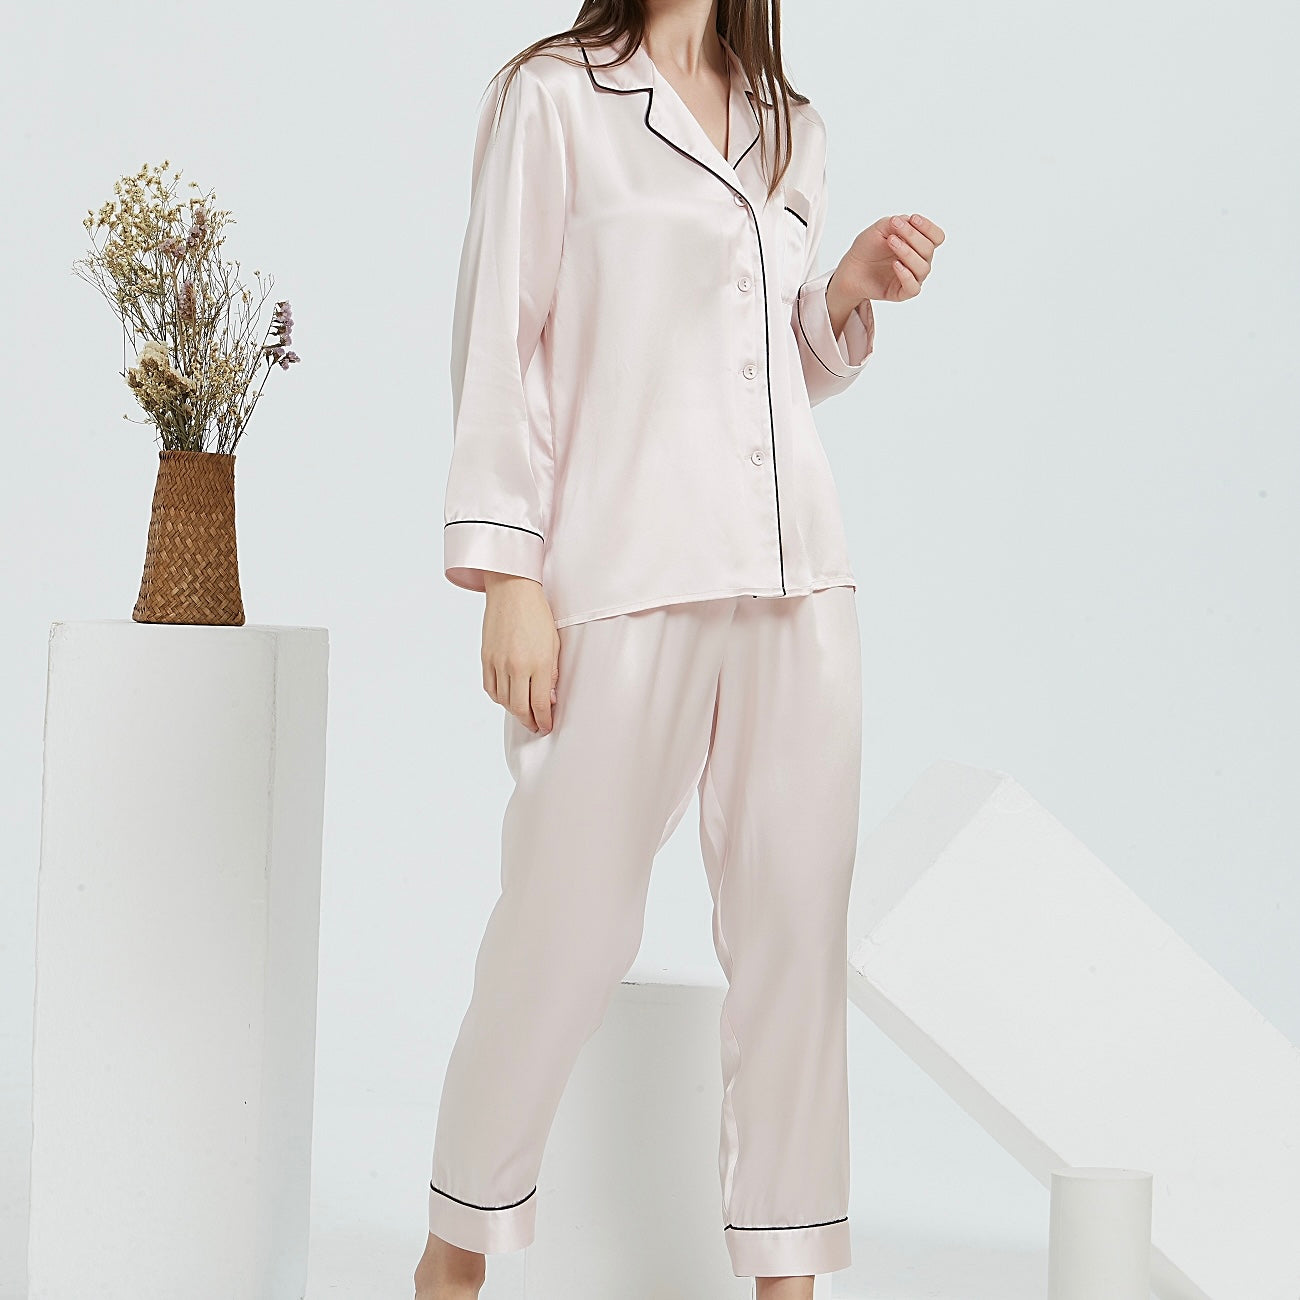 White Trousseau’s Pure Mulberry Silk Long Pyjamas Set in Pink. High quality and breathable, our silk pyjamas set will make you feel stylish while lounging at home. It is the best sleepwear for Singapore weather!